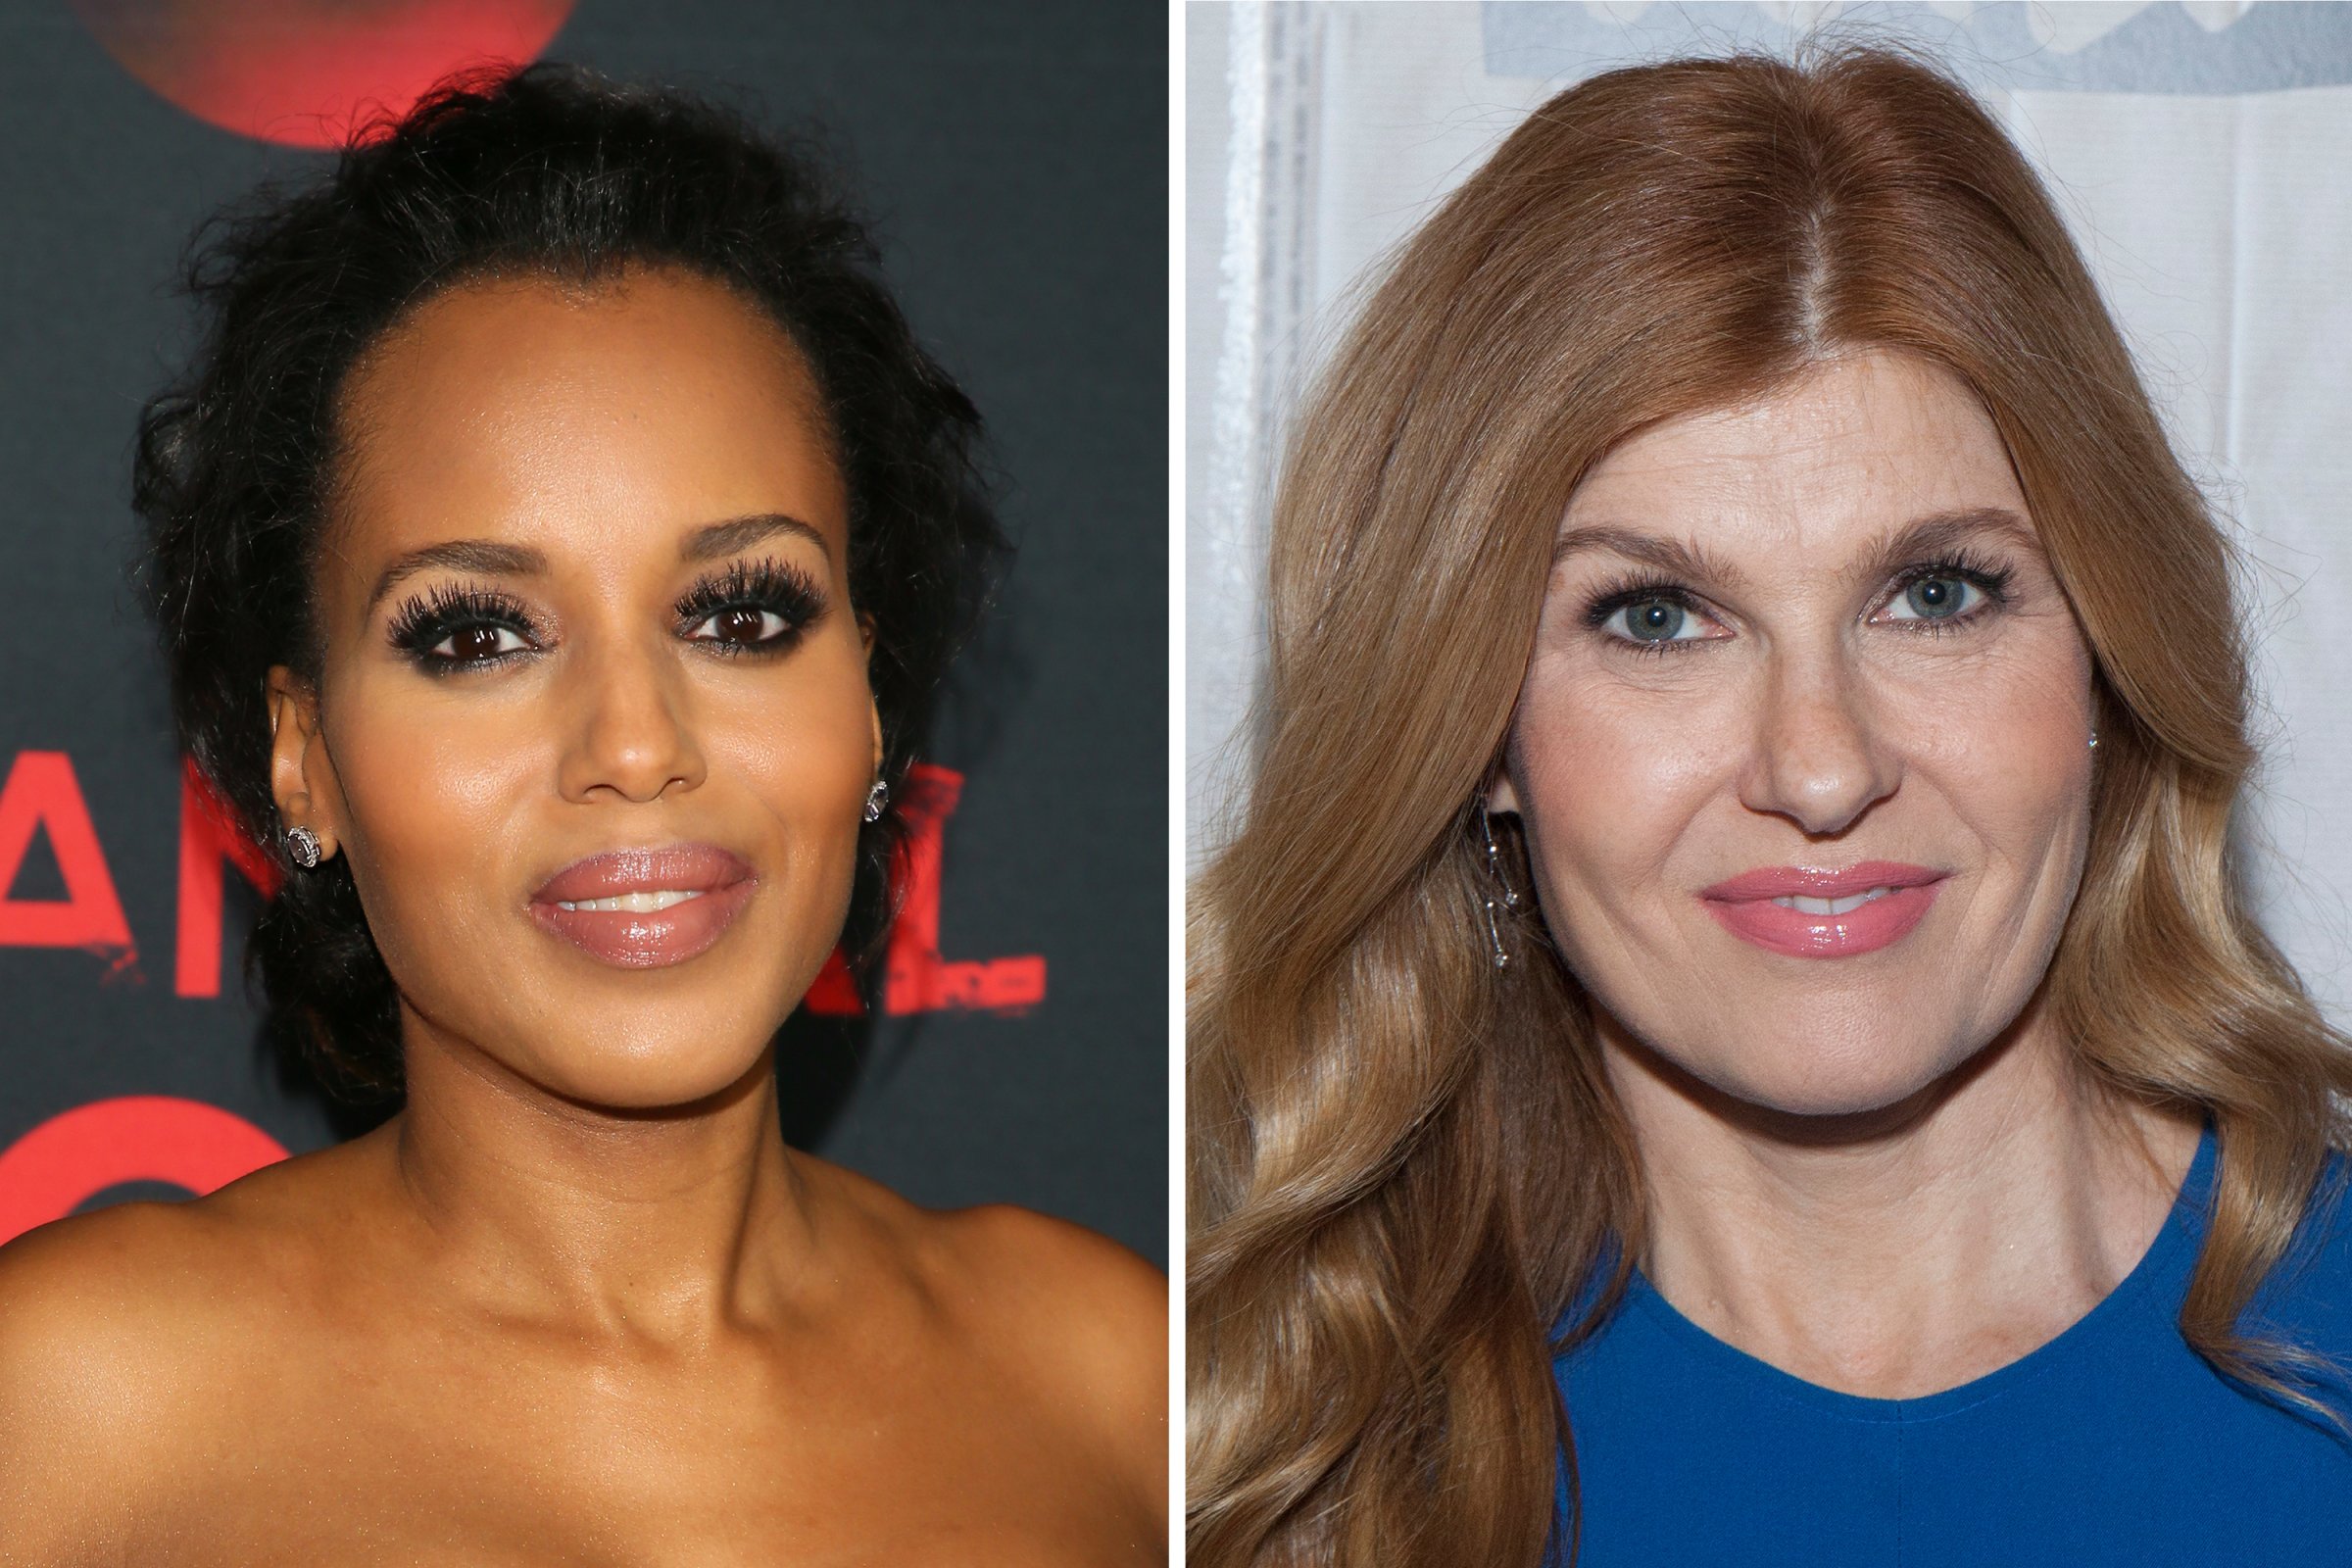 From left, Kerry Washington at the 100th episode of ABC's "Scandal" celebration in Hollywood, April 7, 2017; Connie Britton in New York City, Feb. 28, 2017.